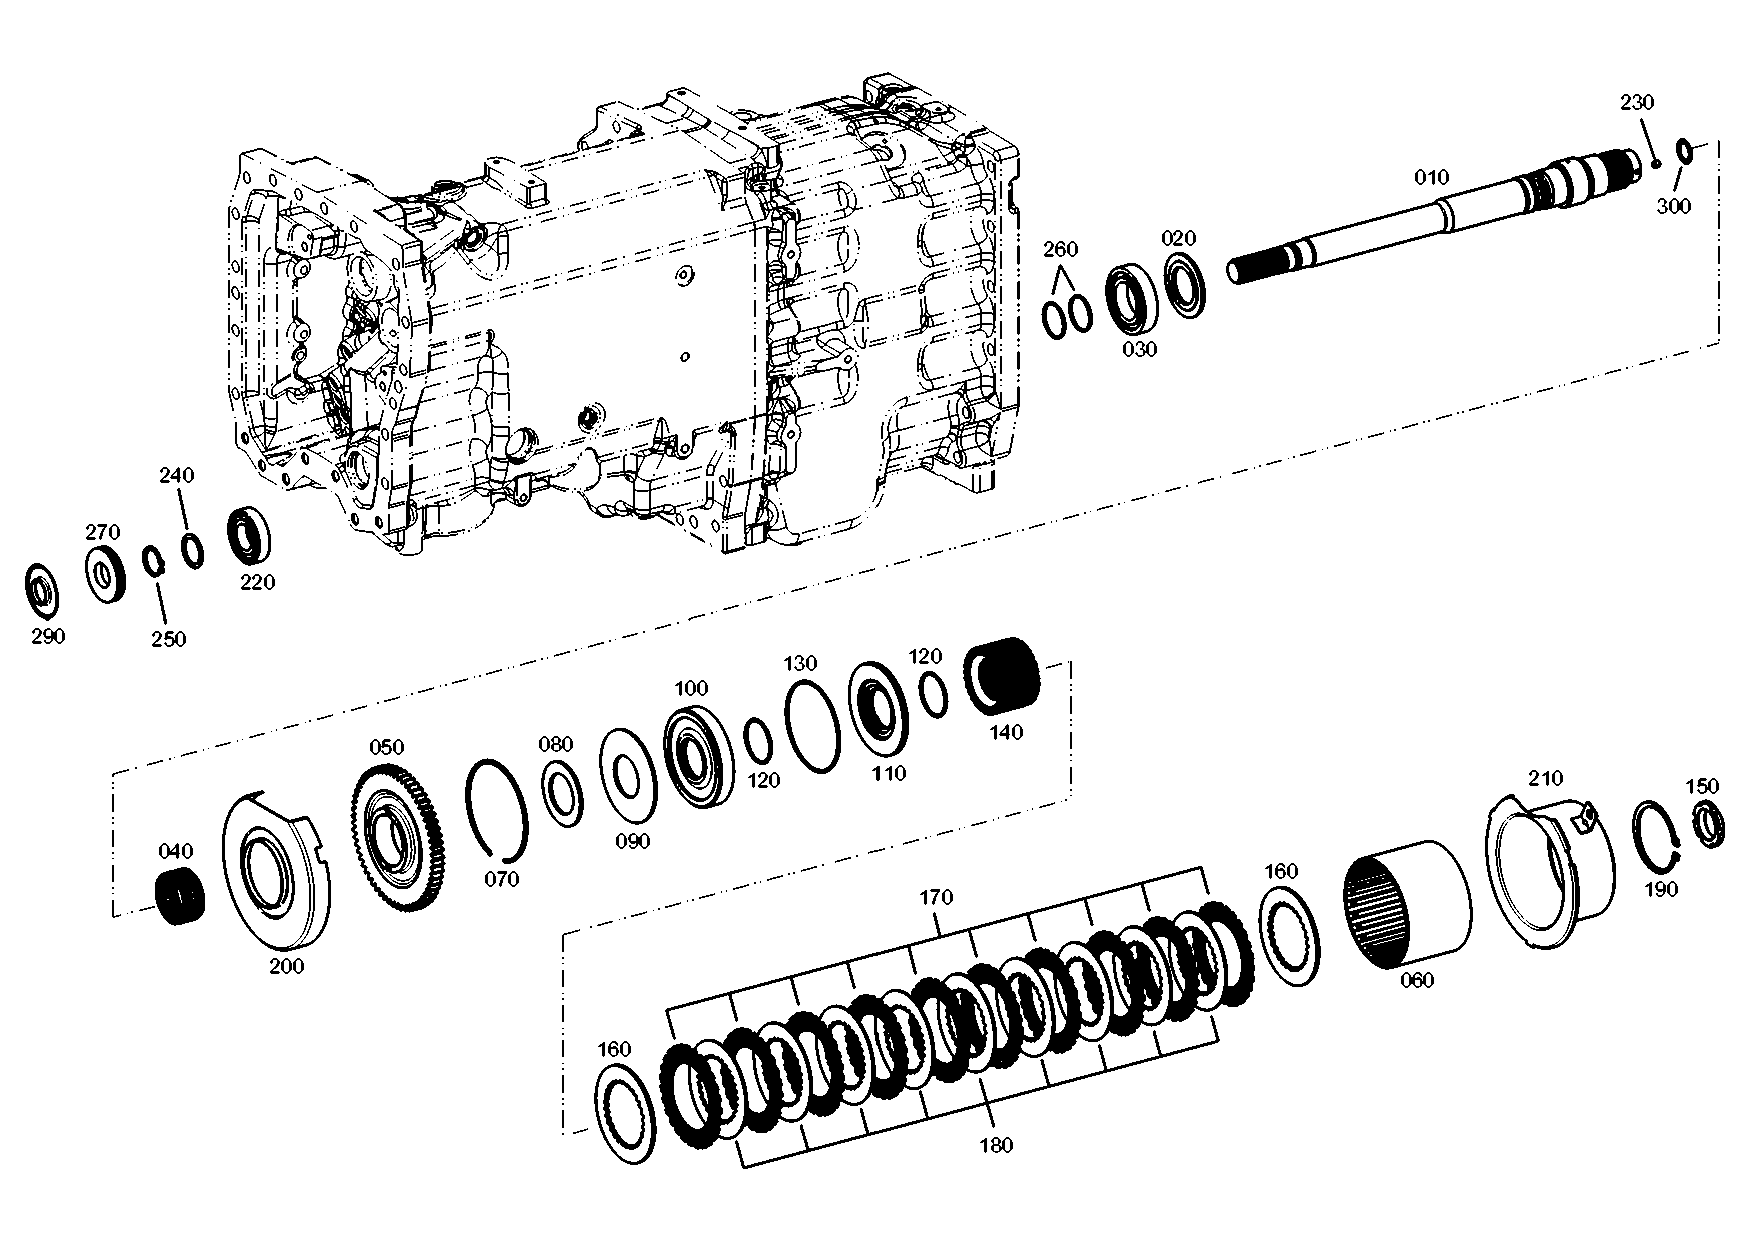 drawing for SKF BB1-4566A - BALL BEARING (figure 5)